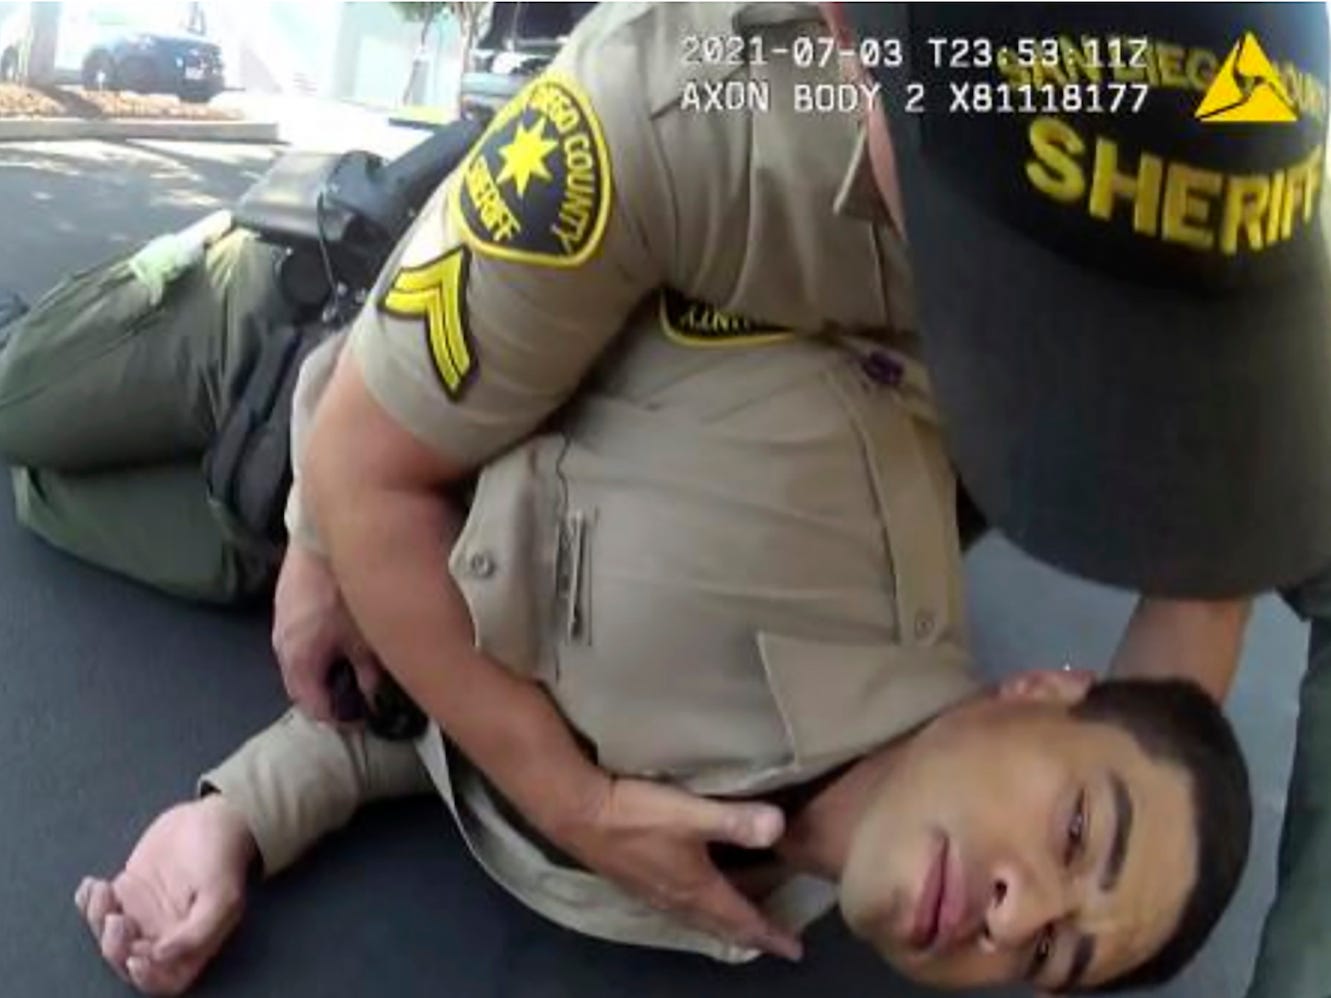 In this image taken from police body camera video and provided by the San Diego County Sheriff's Department, San Diego County Sheriff's Deputy David Faiivae gets aid from an officer, after being exposed to fentanyl on July 3, 2021 in San Diego. A public safety video that told viewers the deputy had a near-death experience after being exposed to fentanyl used the actual footage, the San Diego Sheriff's department said Monday, Aug. 9, 2021, after critics questioned the deputy's severe reaction. The video shows "an actual incident involving the deputy as he processed a white powdery substance that tested positive for Fentanyl," a department news release said. (